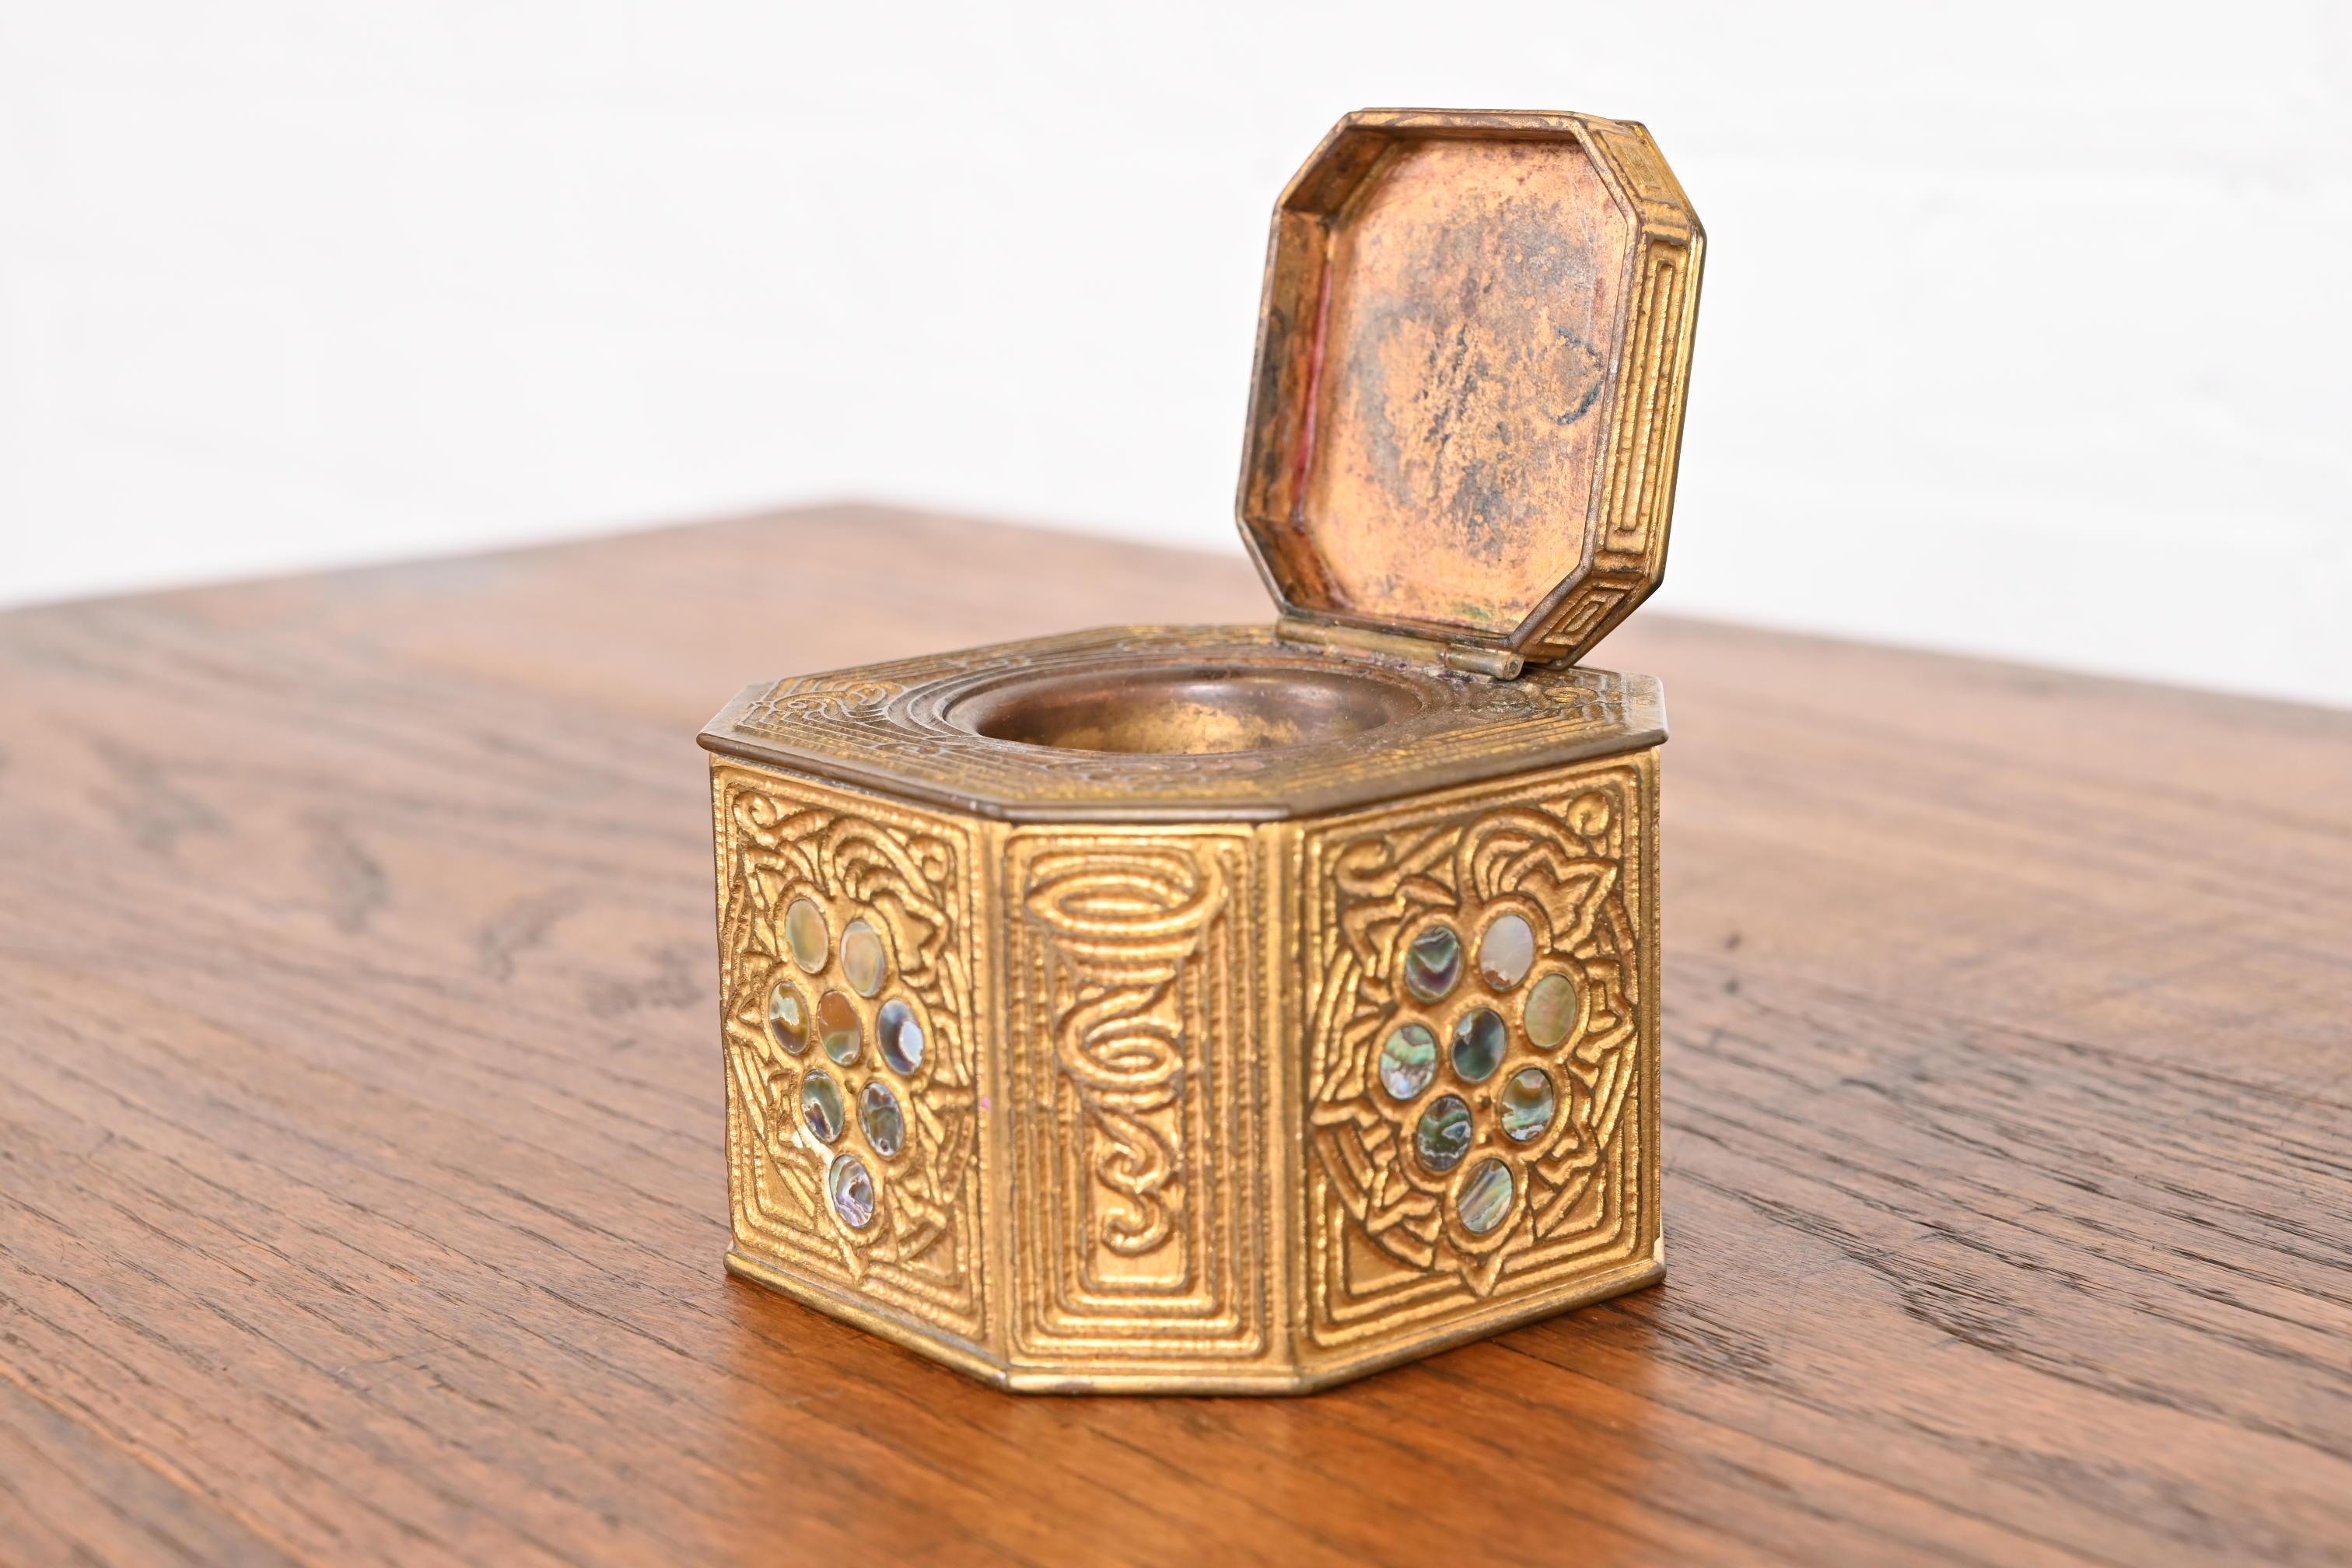 Tiffany Studios New York Bronze Doré and Abalone Inkwell For Sale 5